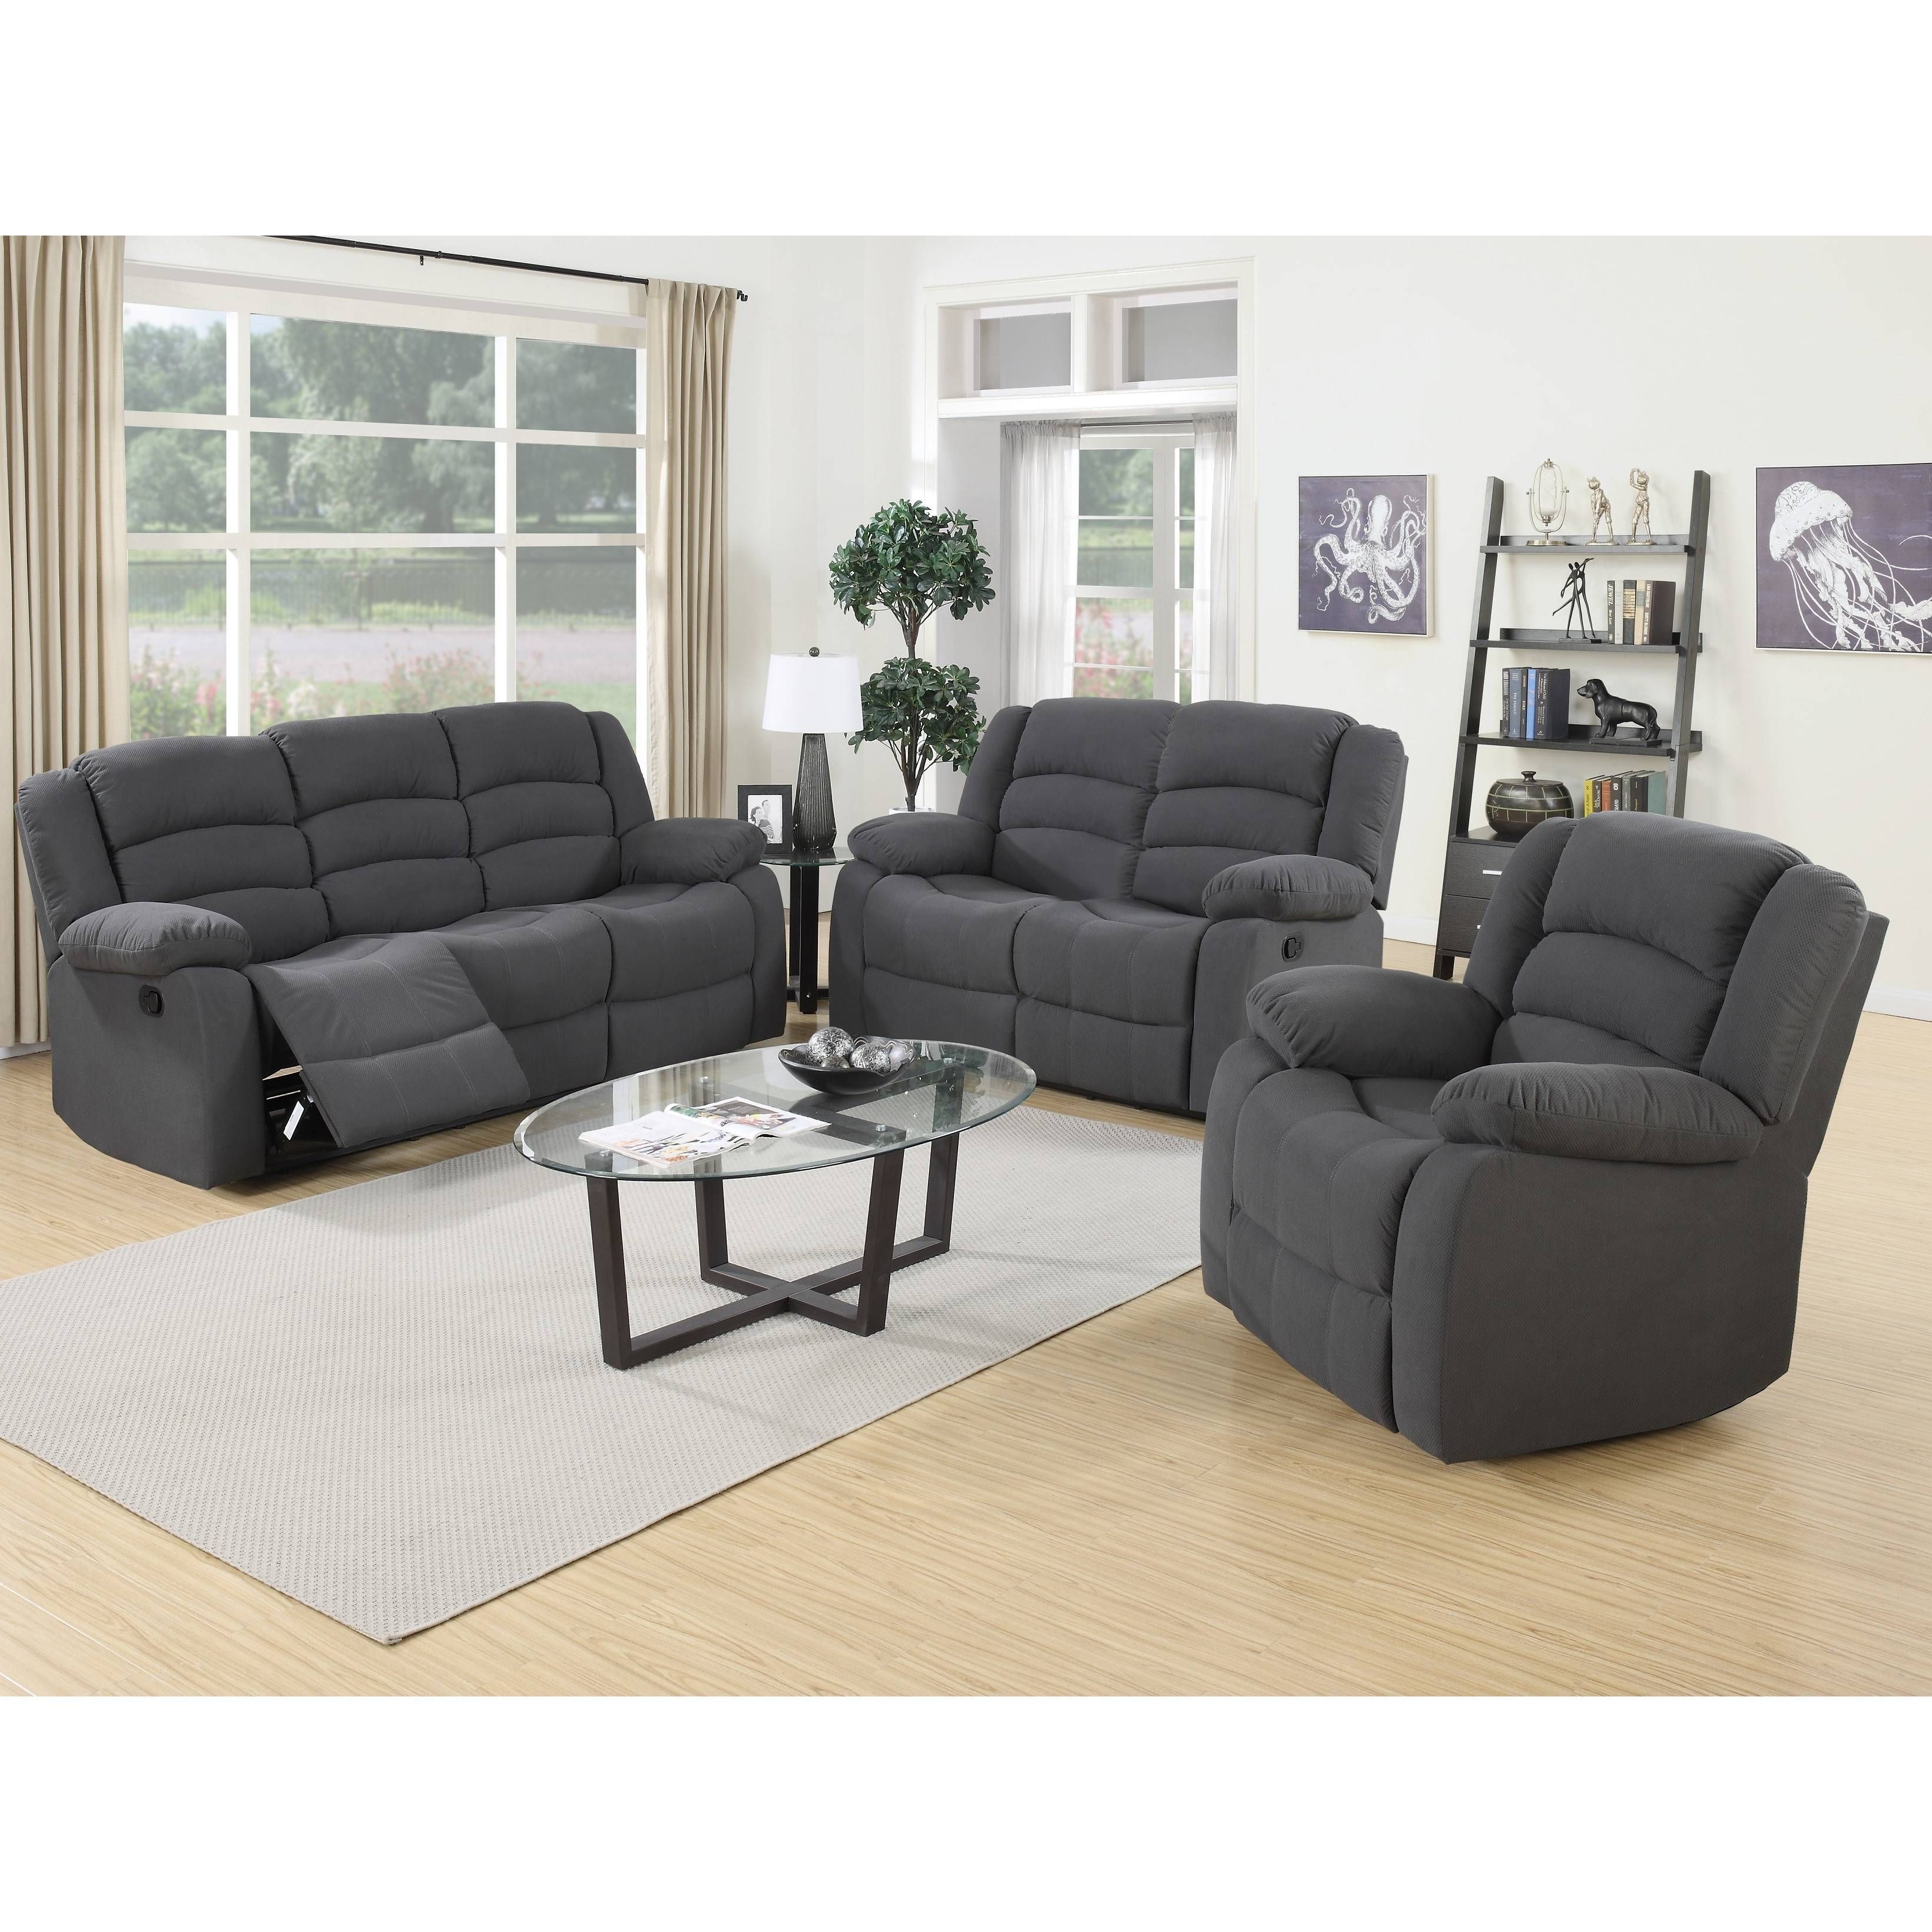 Trend Recliner Sofa Sets 53 On Living Room Sofa Inspiration With In Sofa Trend (View 8 of 25)